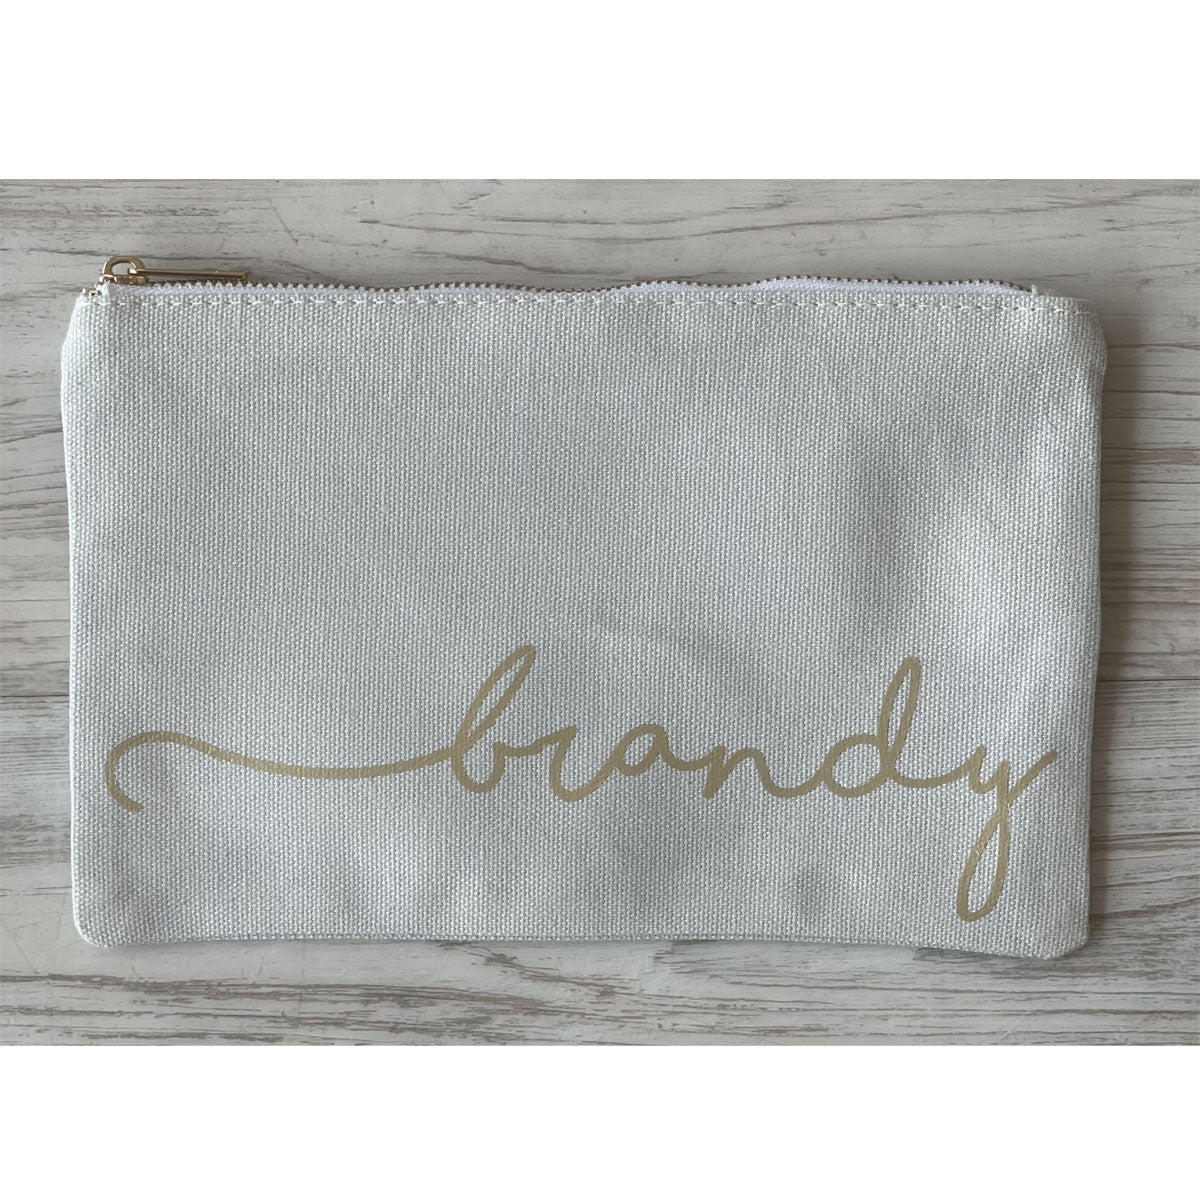 Personalized Cosmetic Bag - Grey - Southern Grace Creations